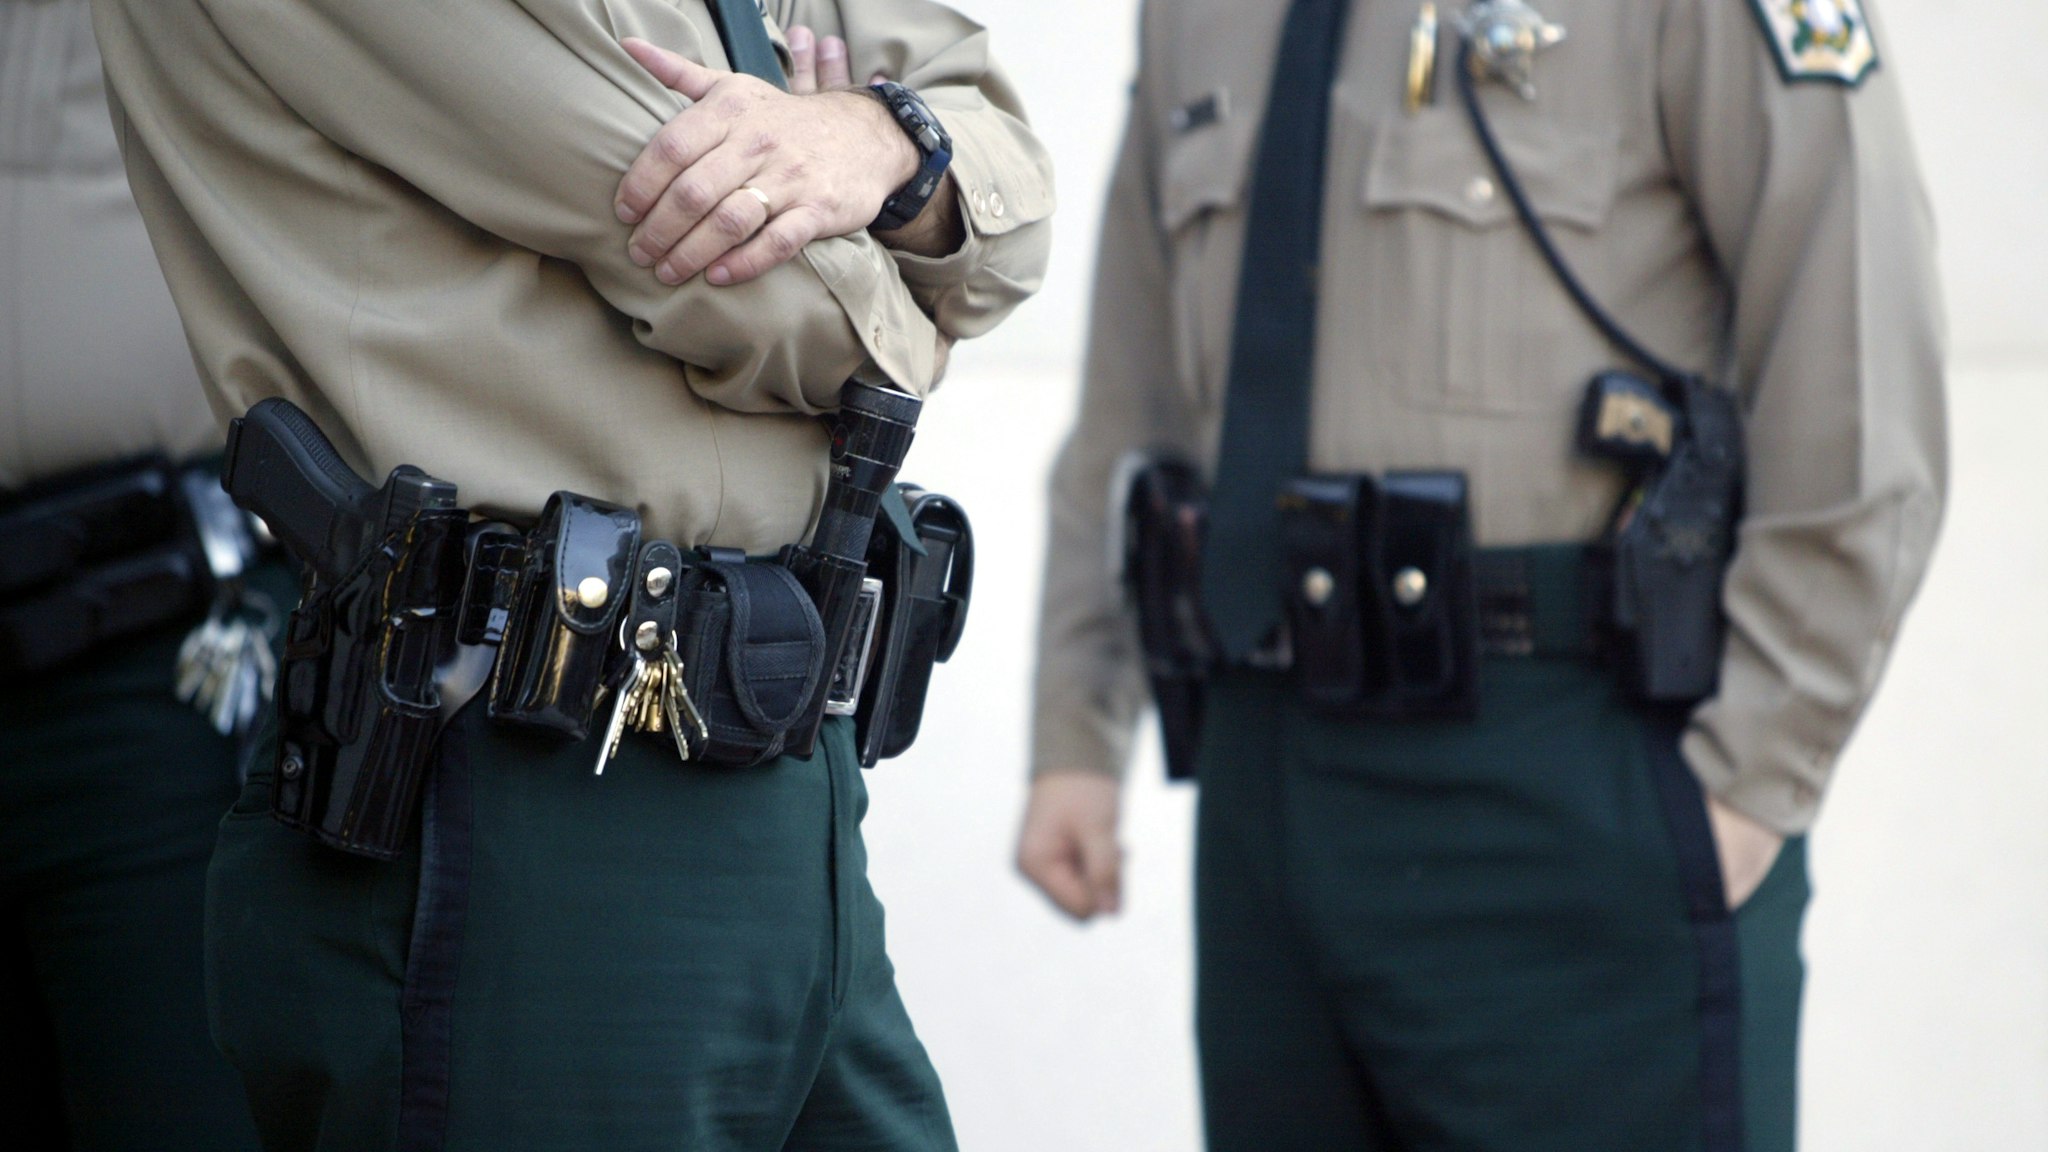 "police officers stand with handguns, stun gun and tools on their holsters."